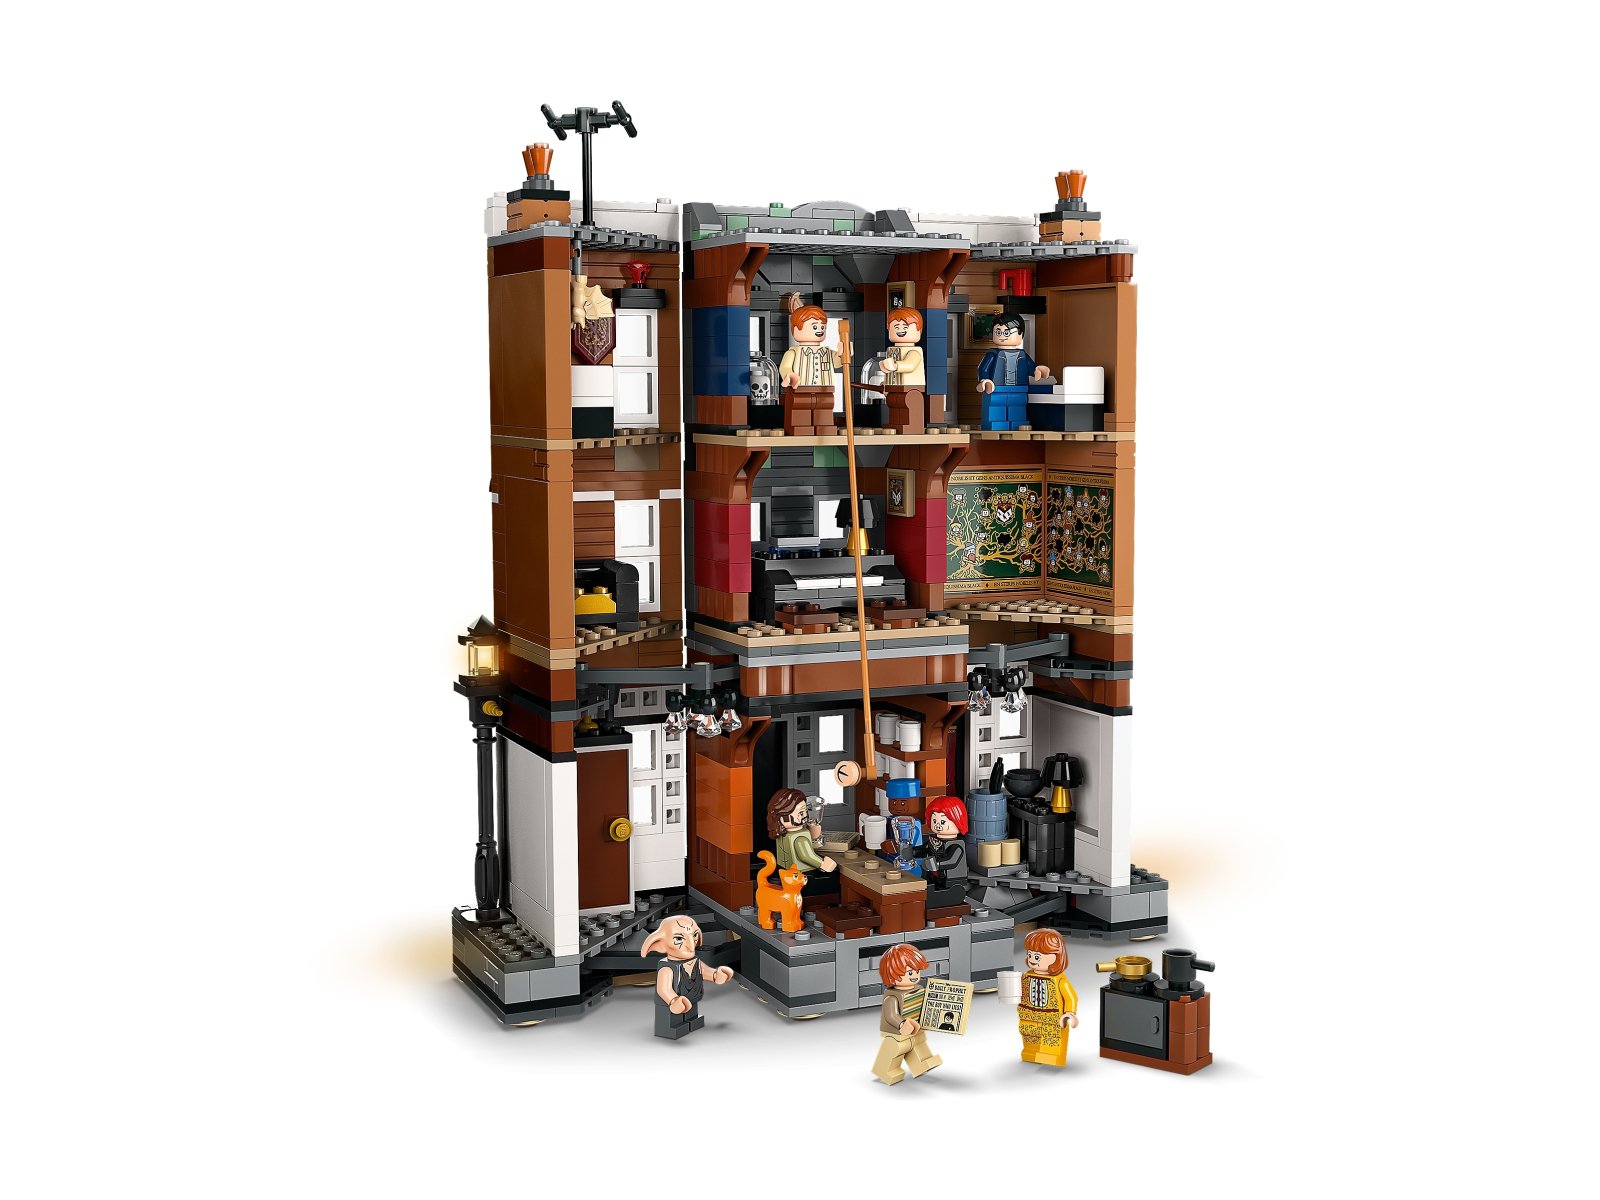 LEGO 76408 Harry Potter Ulica Grimmauld Place 12